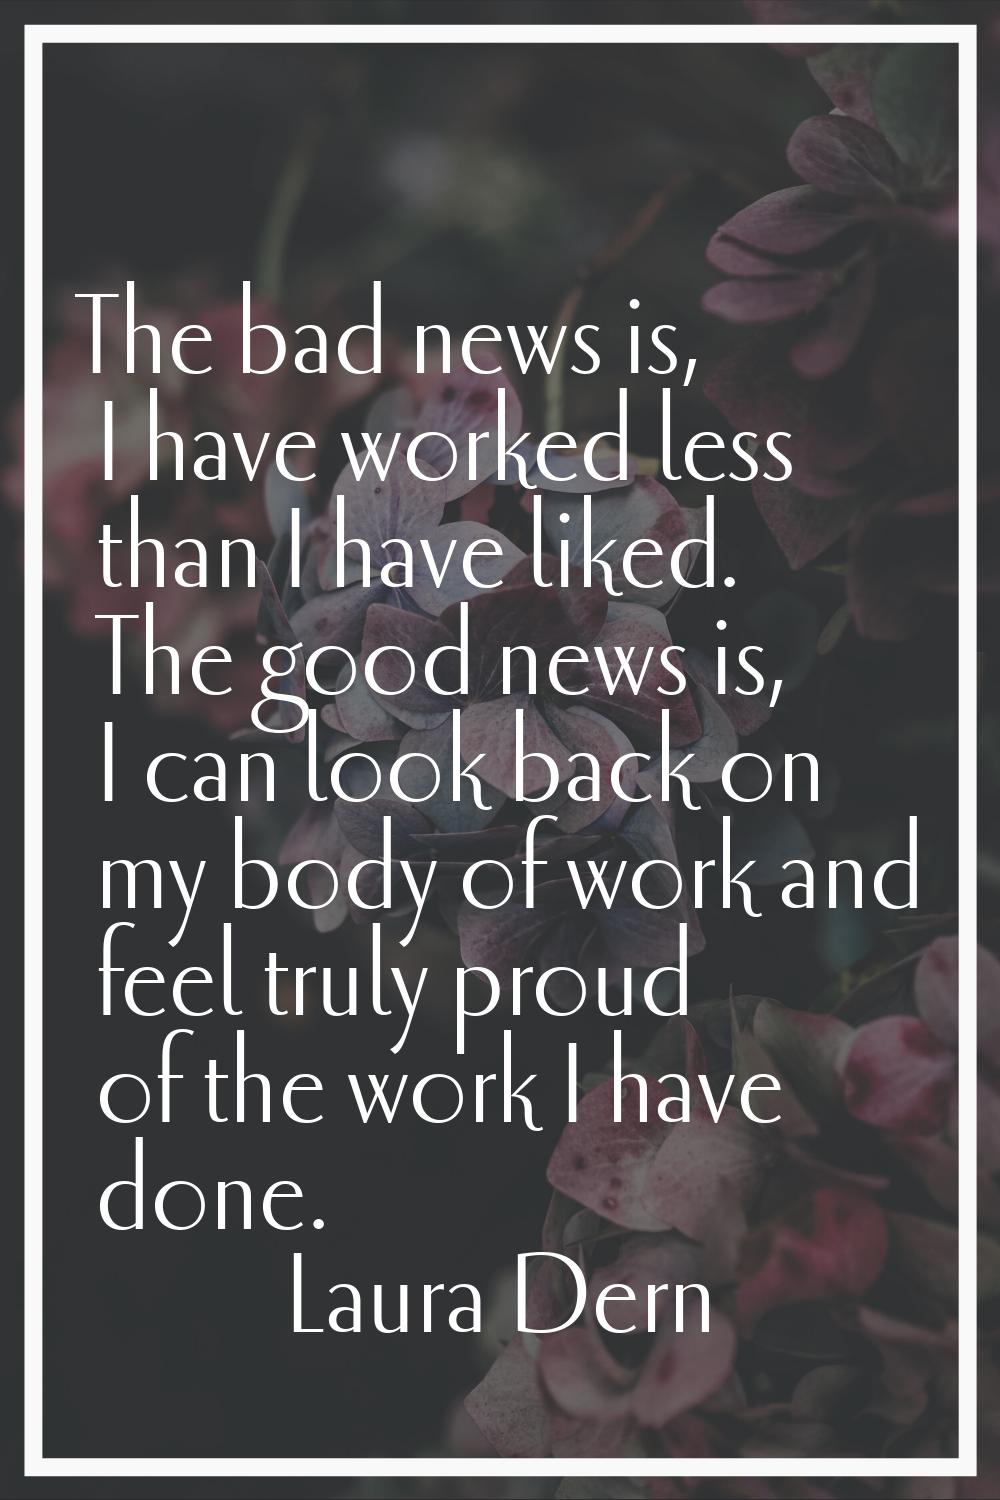 The bad news is, I have worked less than I have liked. The good news is, I can look back on my body